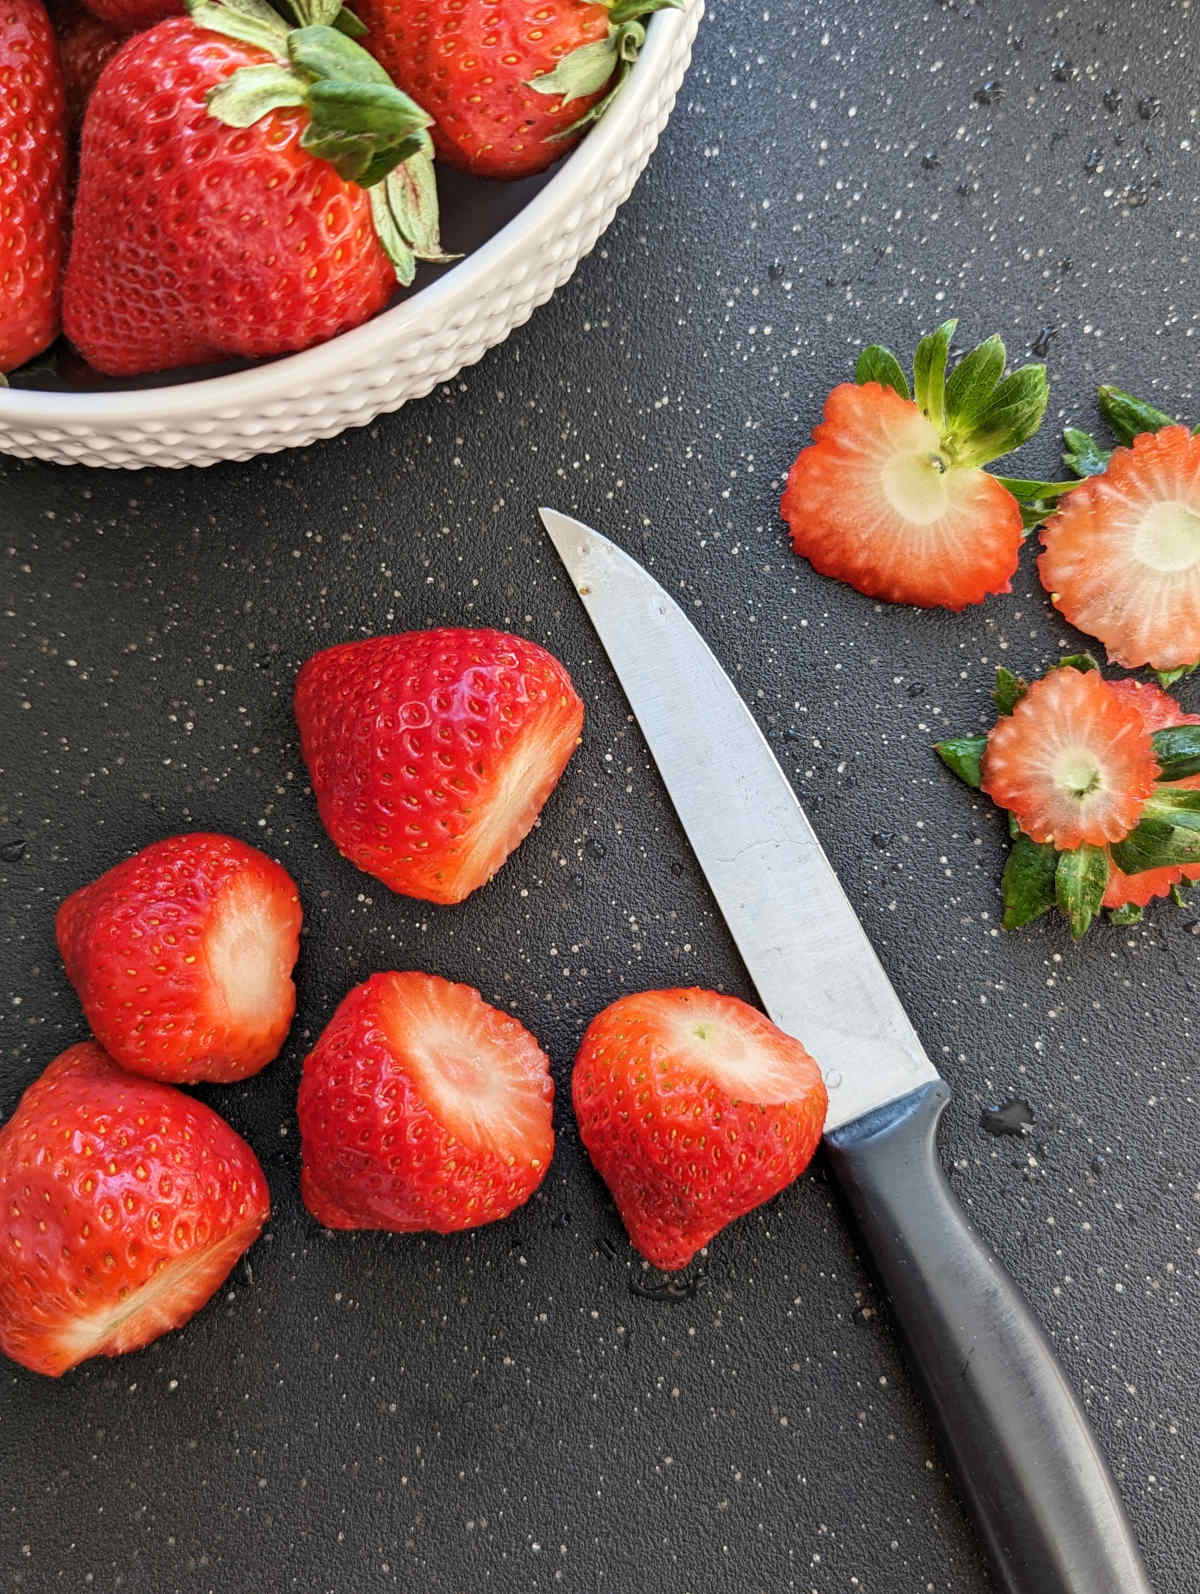 Strawberries with the tops sliced off next to a knife on a cutting board.